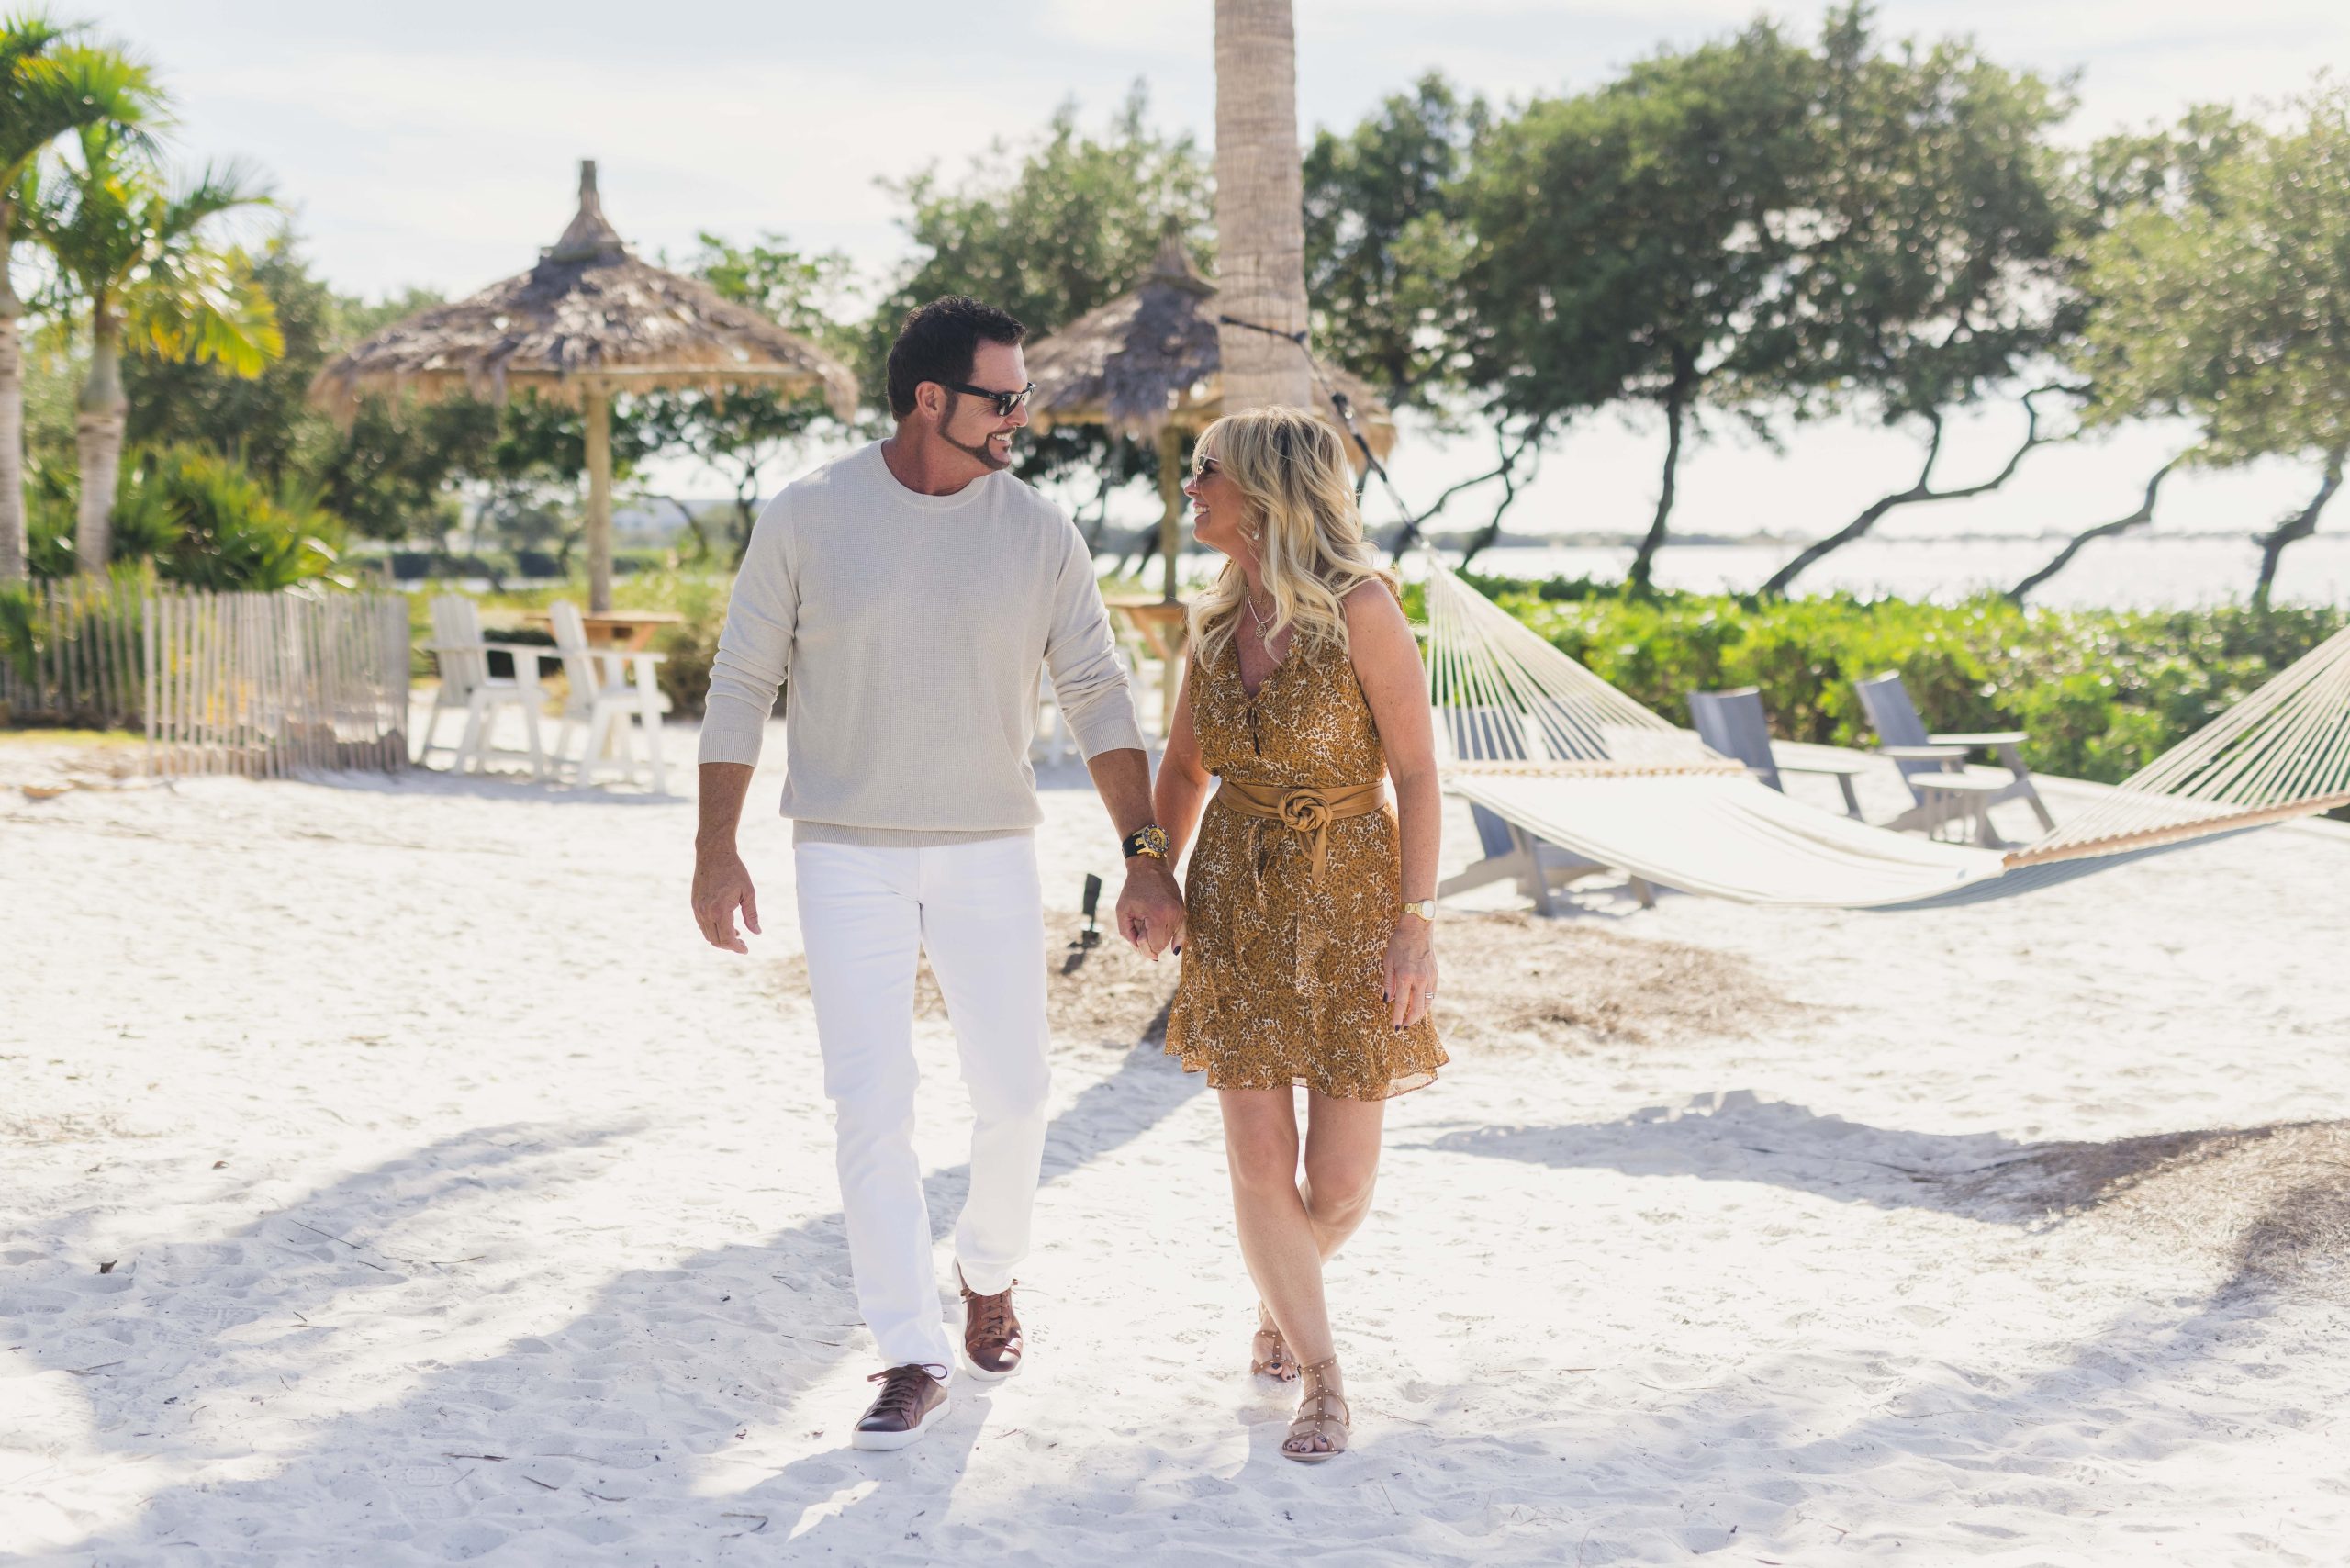 A couple gazes deeply into each other's eyes as they walk along the white sandy beach